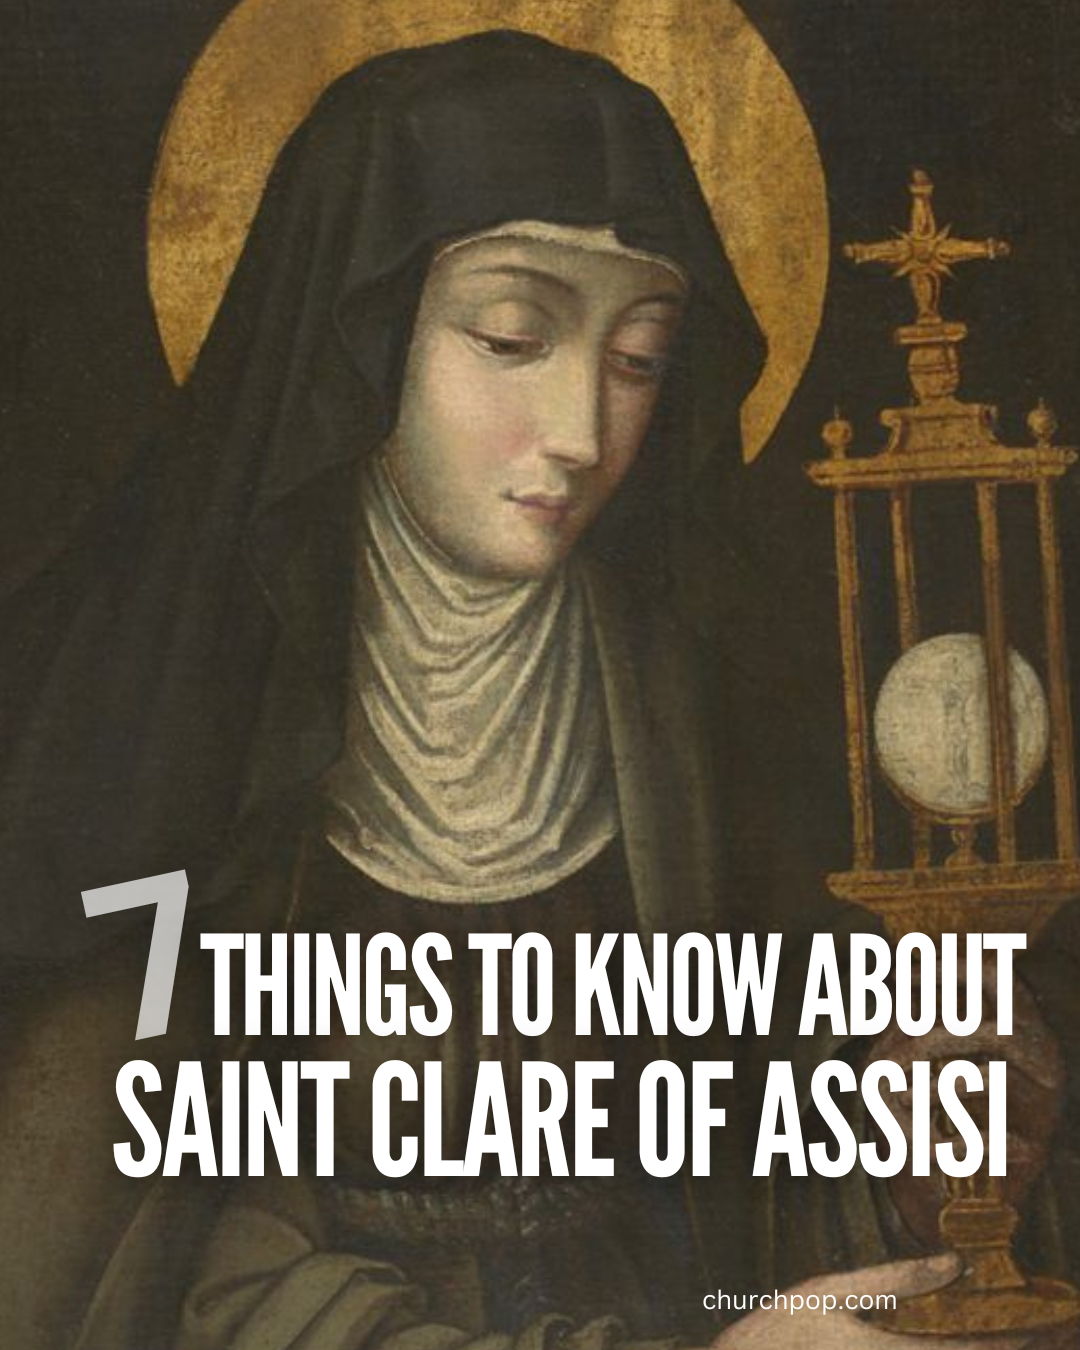 Who was Saint Clare of Assisi?